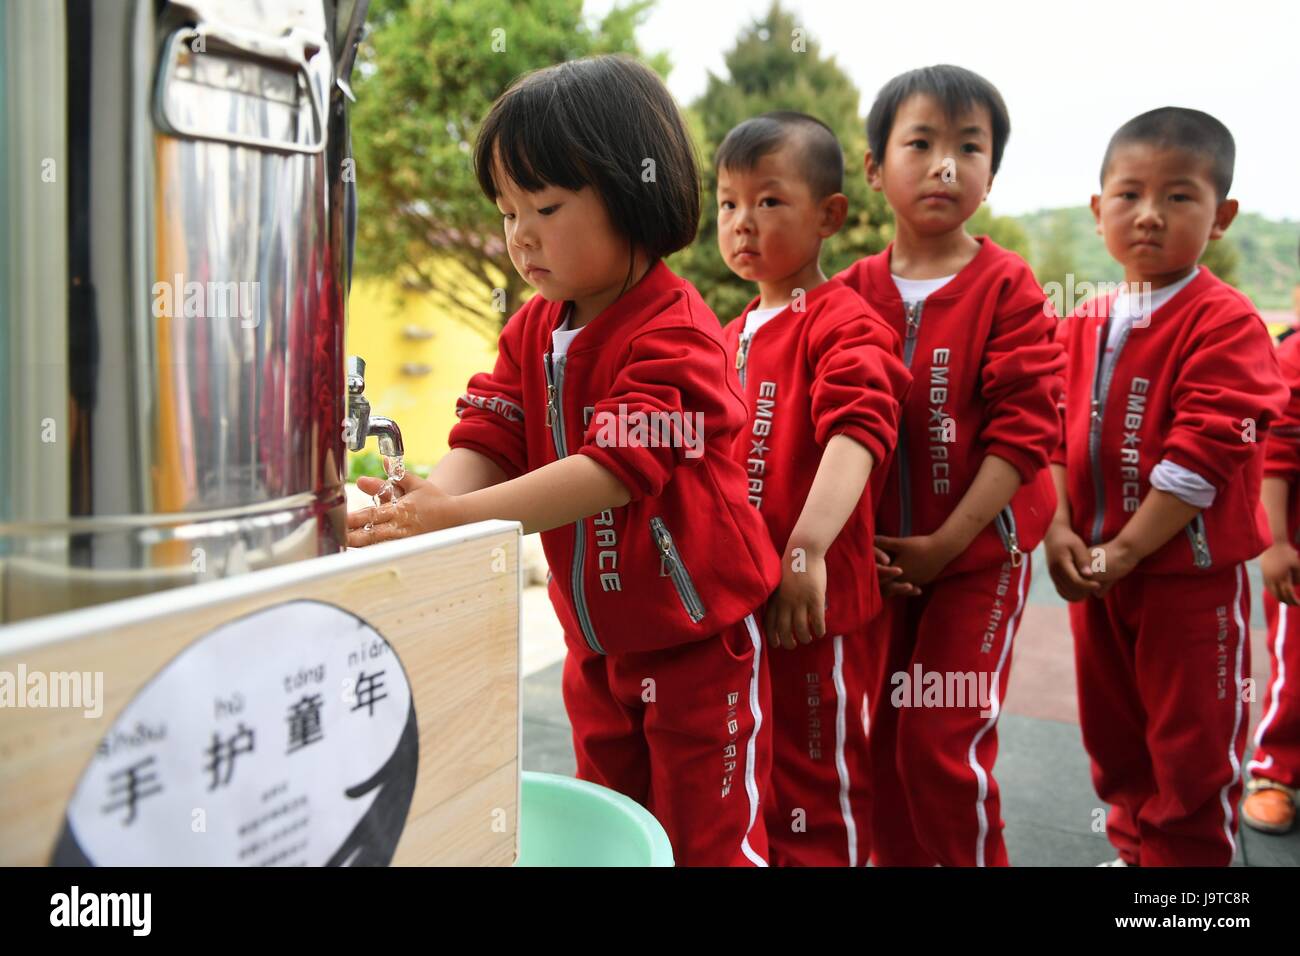 Huachi, China's Gansu Province. 3rd June, 2017. Children queue up to wash their hands at a kindergarten in Shangwan Village of Huachi County, northwest China's Gansu Province, June 3, 2017. To improve the hygiene education in remote areas, China Develpment Research Foundation and Unilever carried out a project to promote hand wash among children in classes. The project so far has covered more than 10,000 rural children in serveral provinces of China. Credit: Chen Bin/Xinhua/Alamy Live News Stock Photo